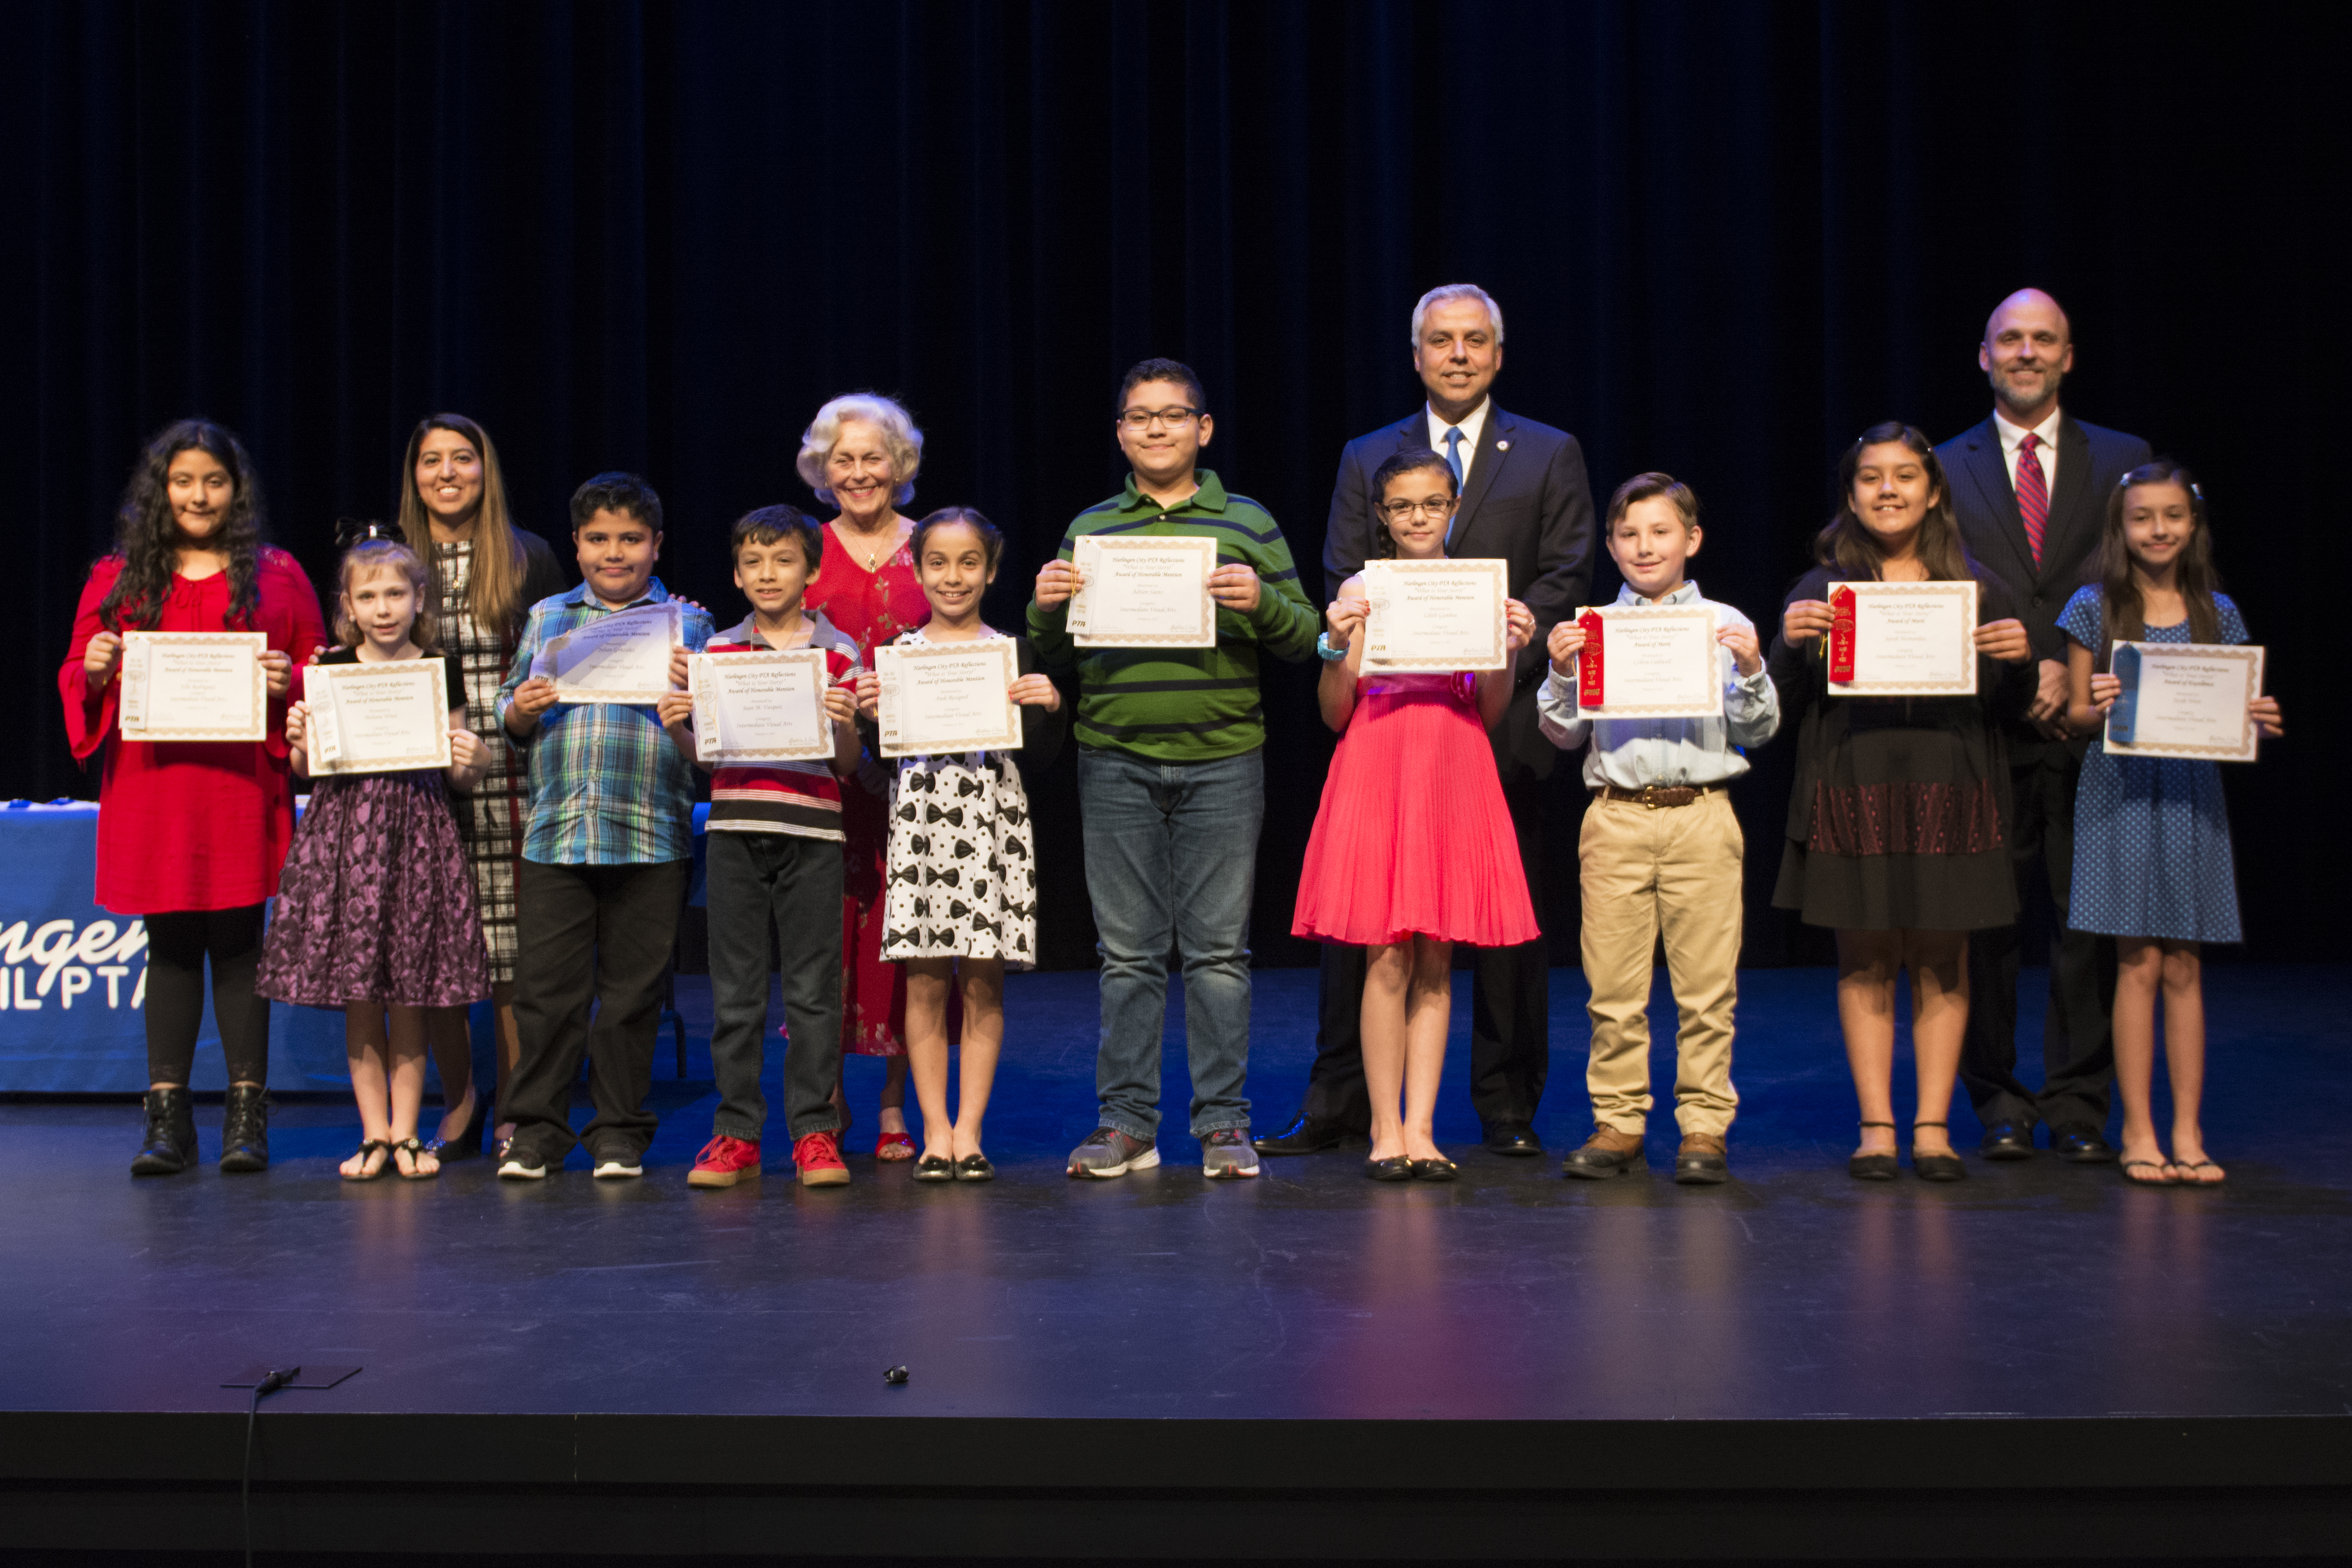 20 students advance to State PTA Reflections competition